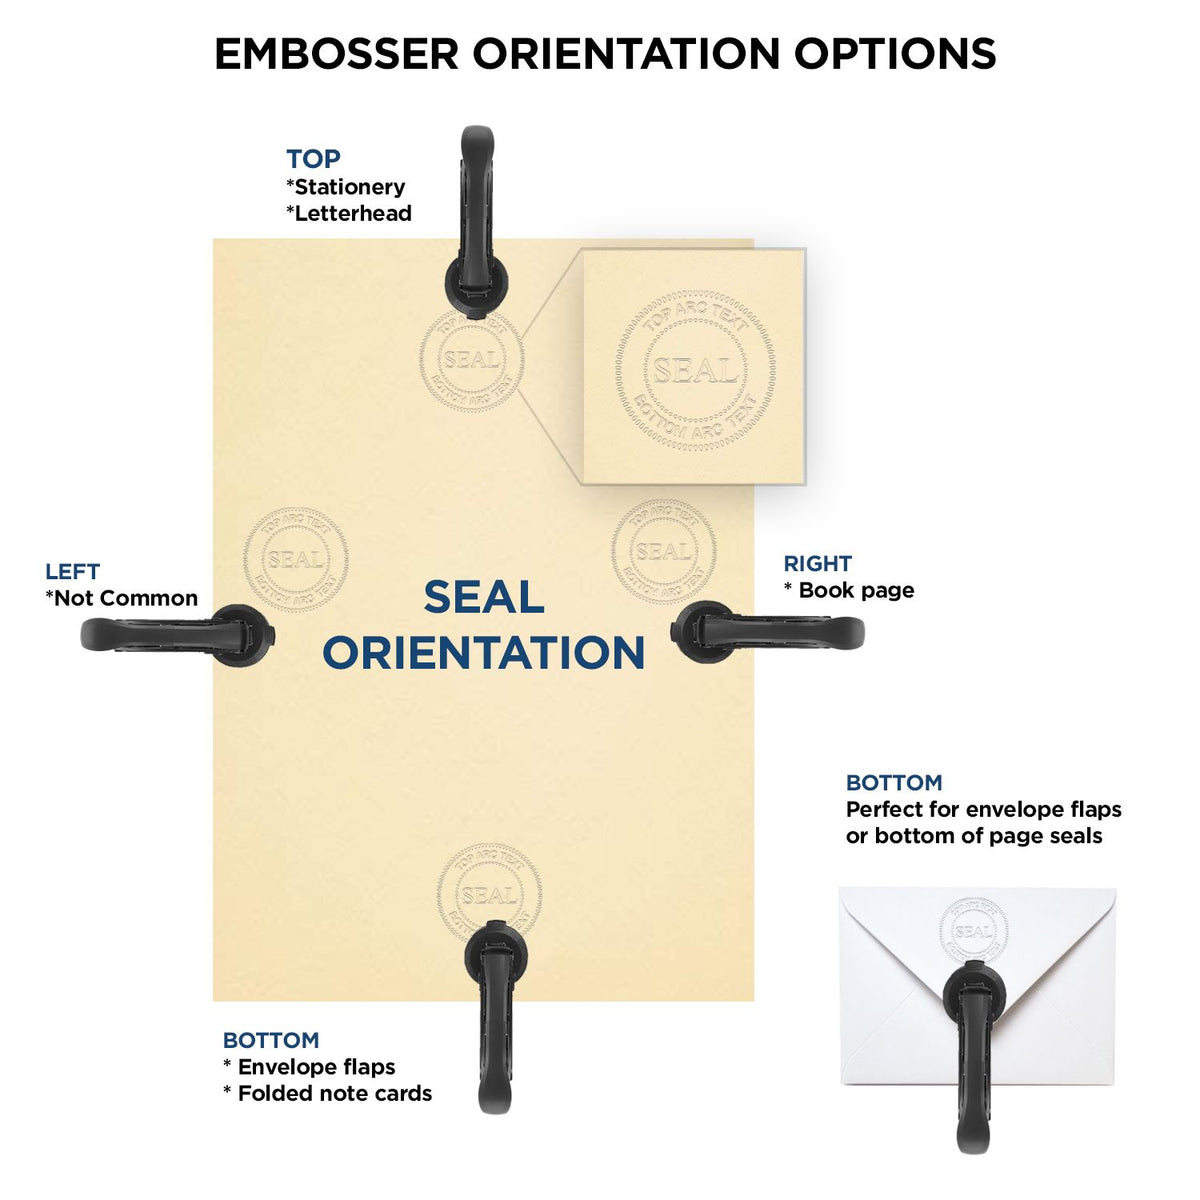 An infographic for the Colorado Geologist Desk Seal showing embosser orientation, this is showing examples of a top, bottom, right and left insert.